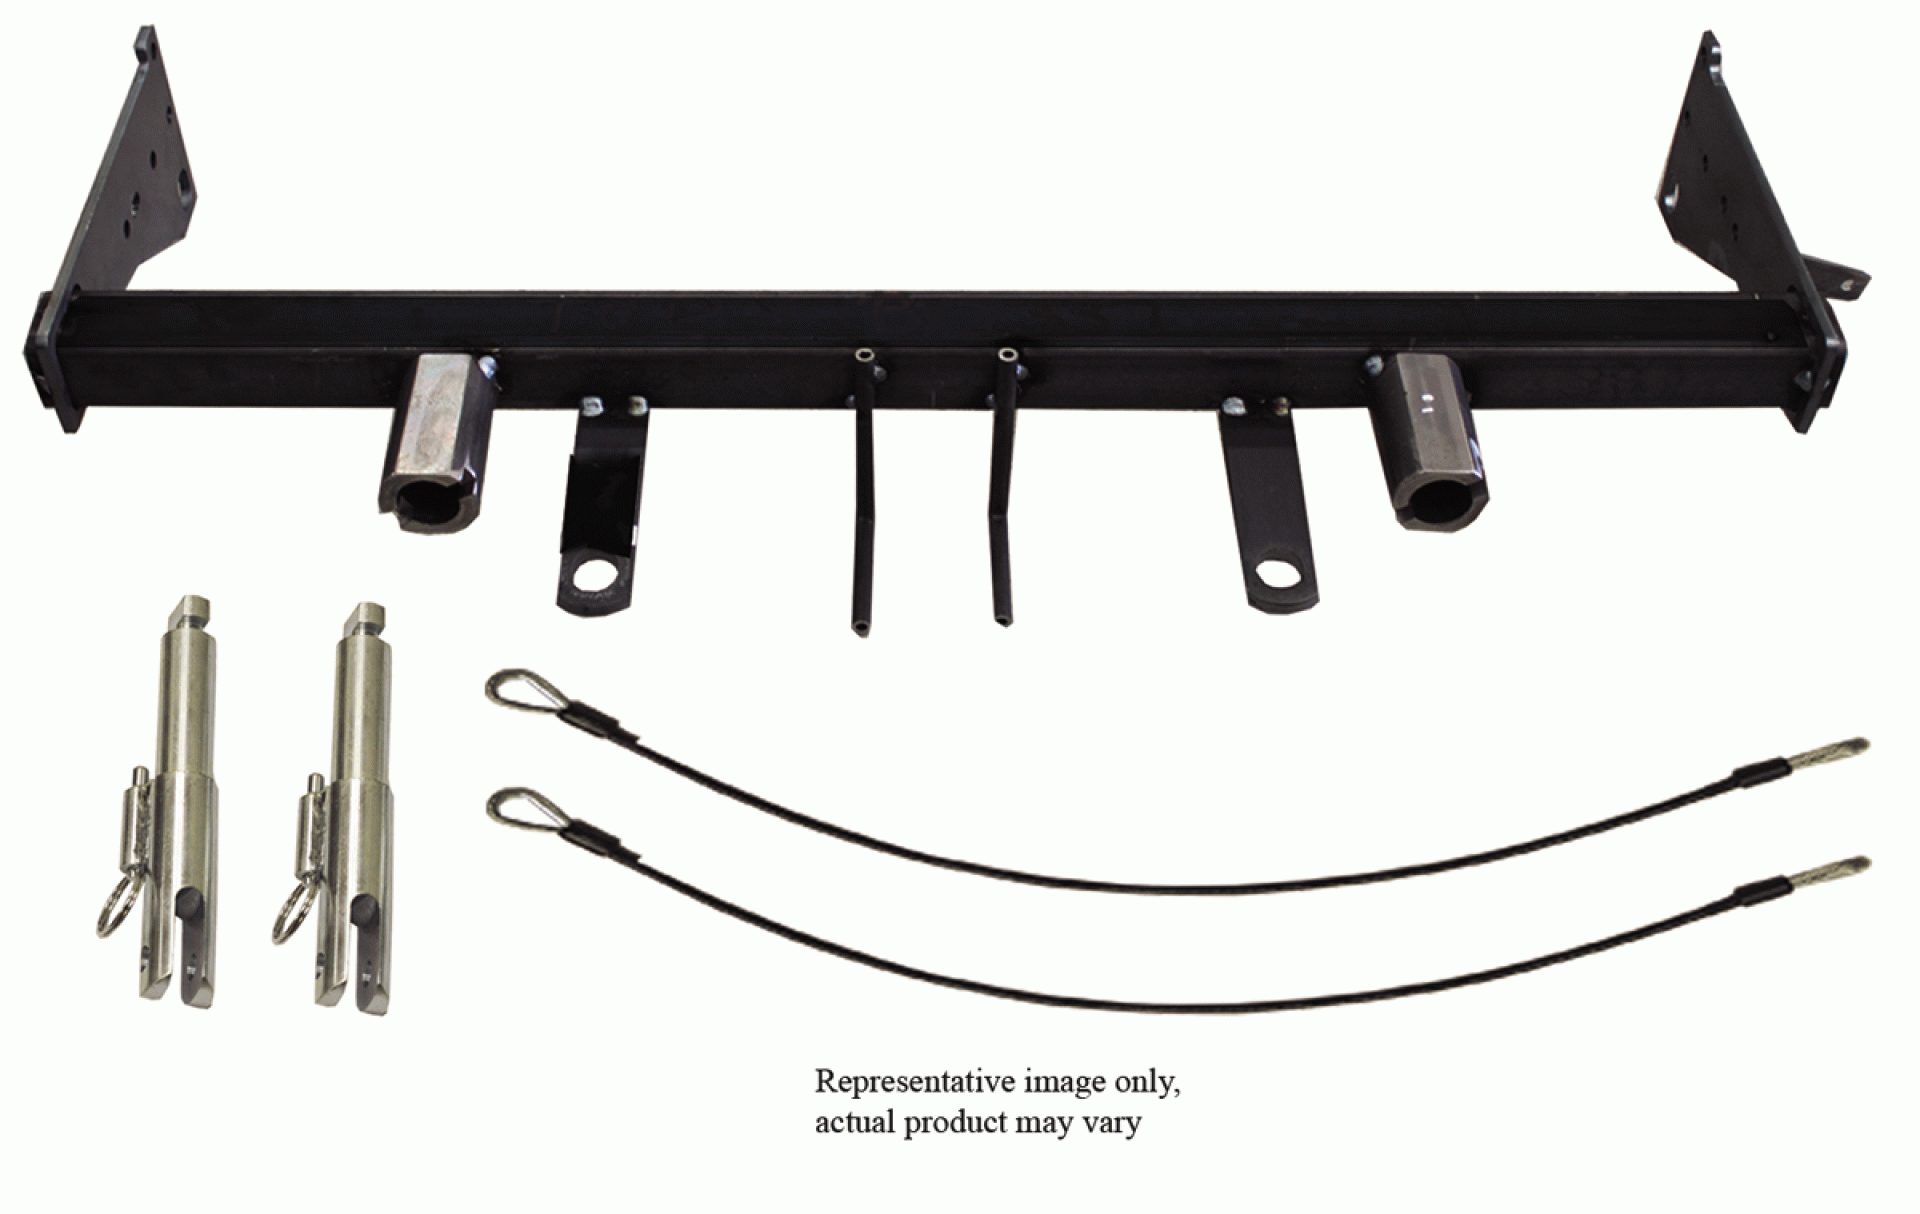 BLUE OX | BX1721 | Custom fit bracket kit attaches to vehicle frame